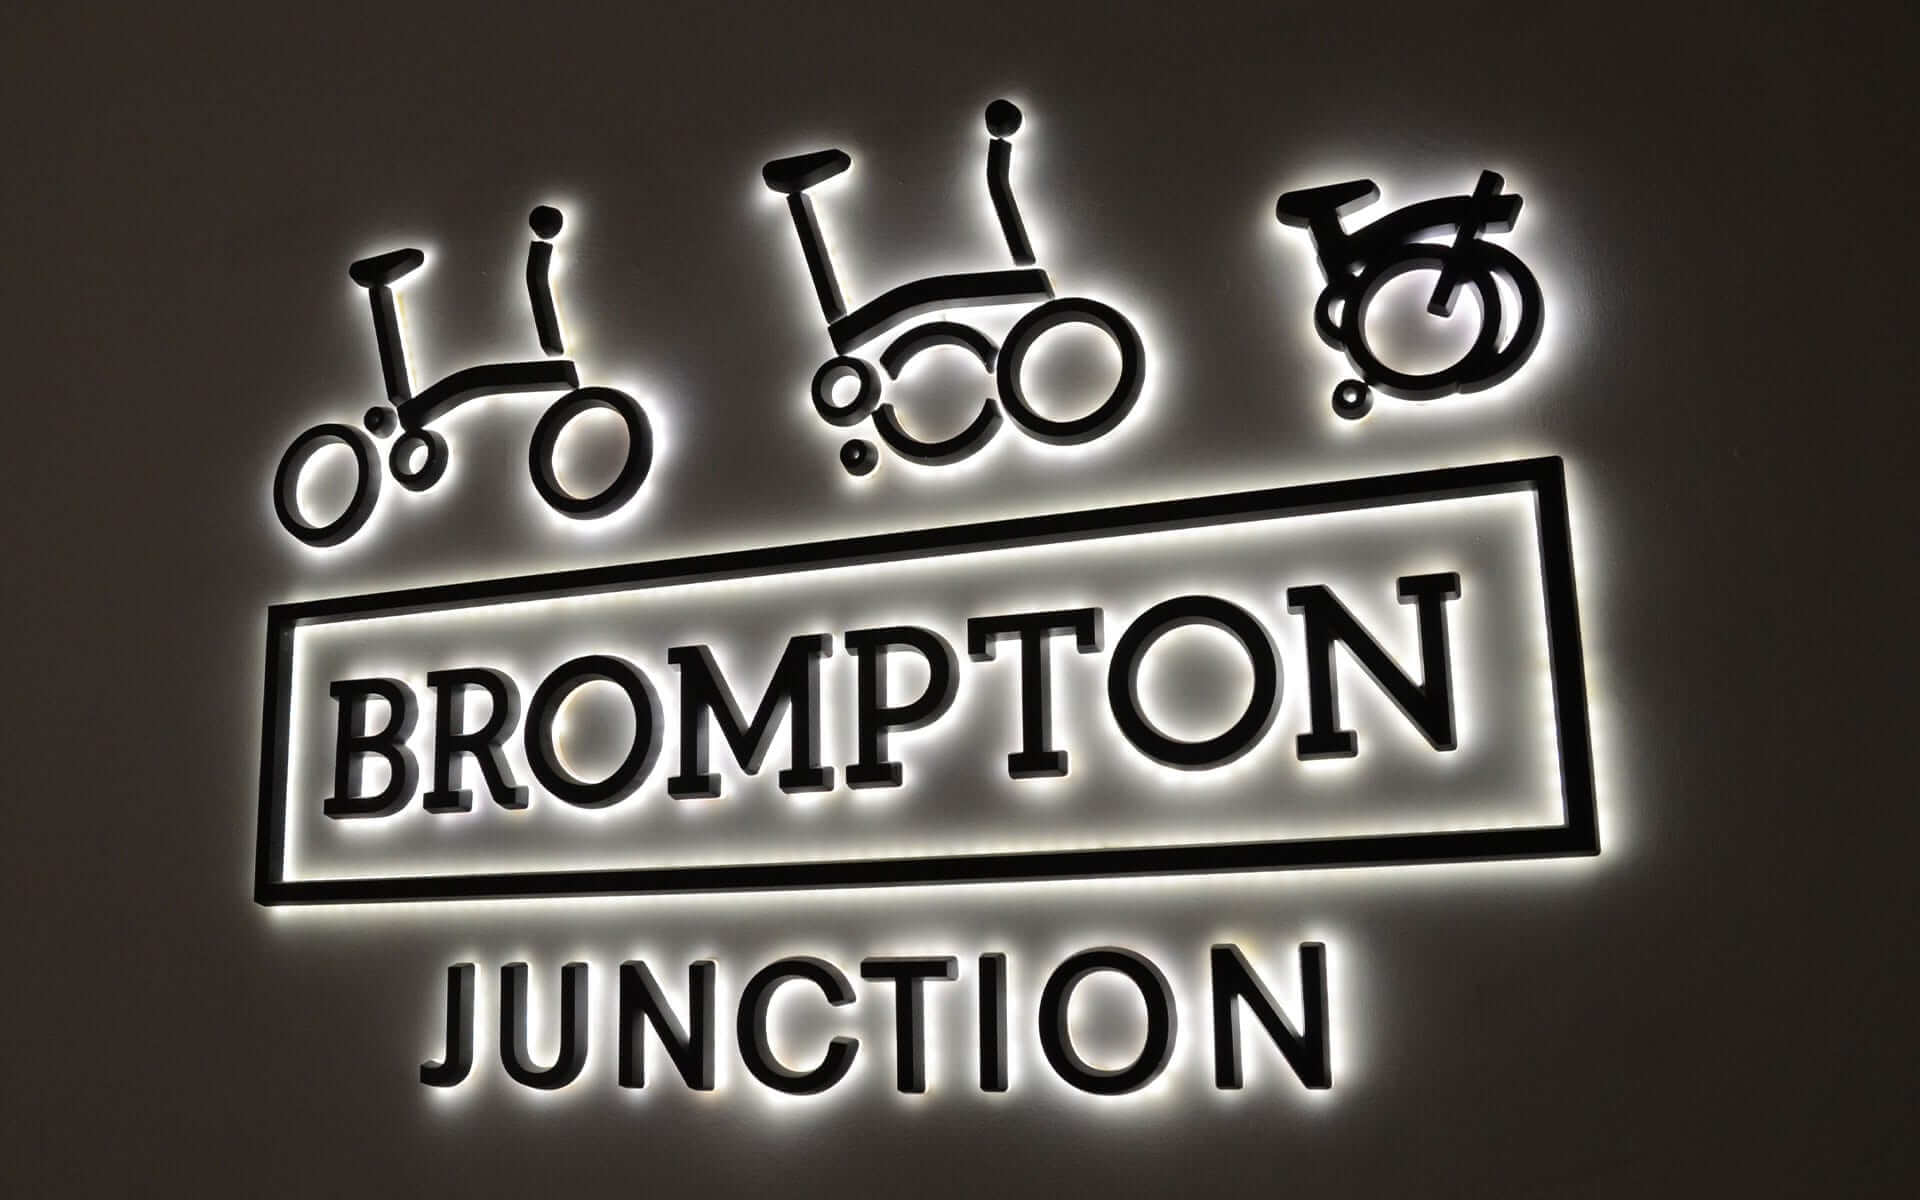 Back-lit Acrylic Channel Letters for Brompton Junction